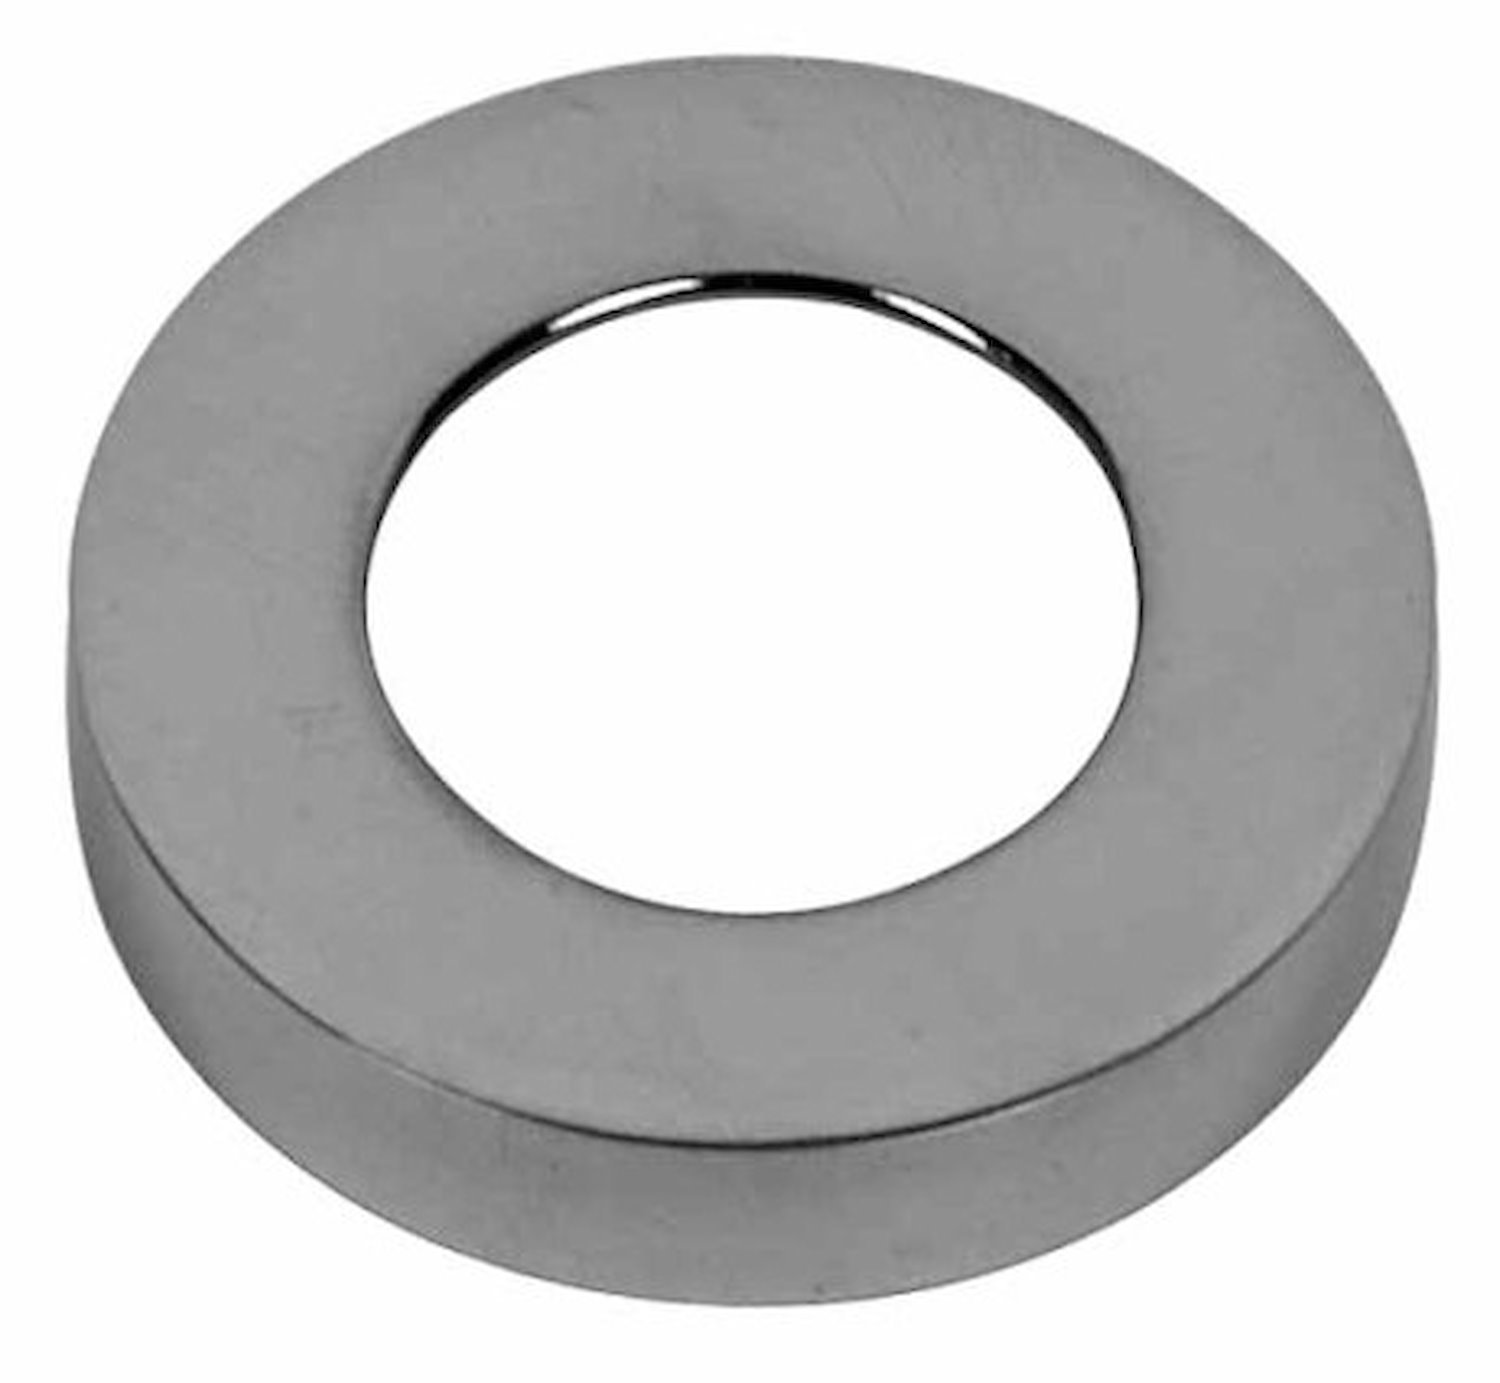 Rubber Breather Grommet - 3/4 Id - 1 1/4 Od - 1/4 Groove